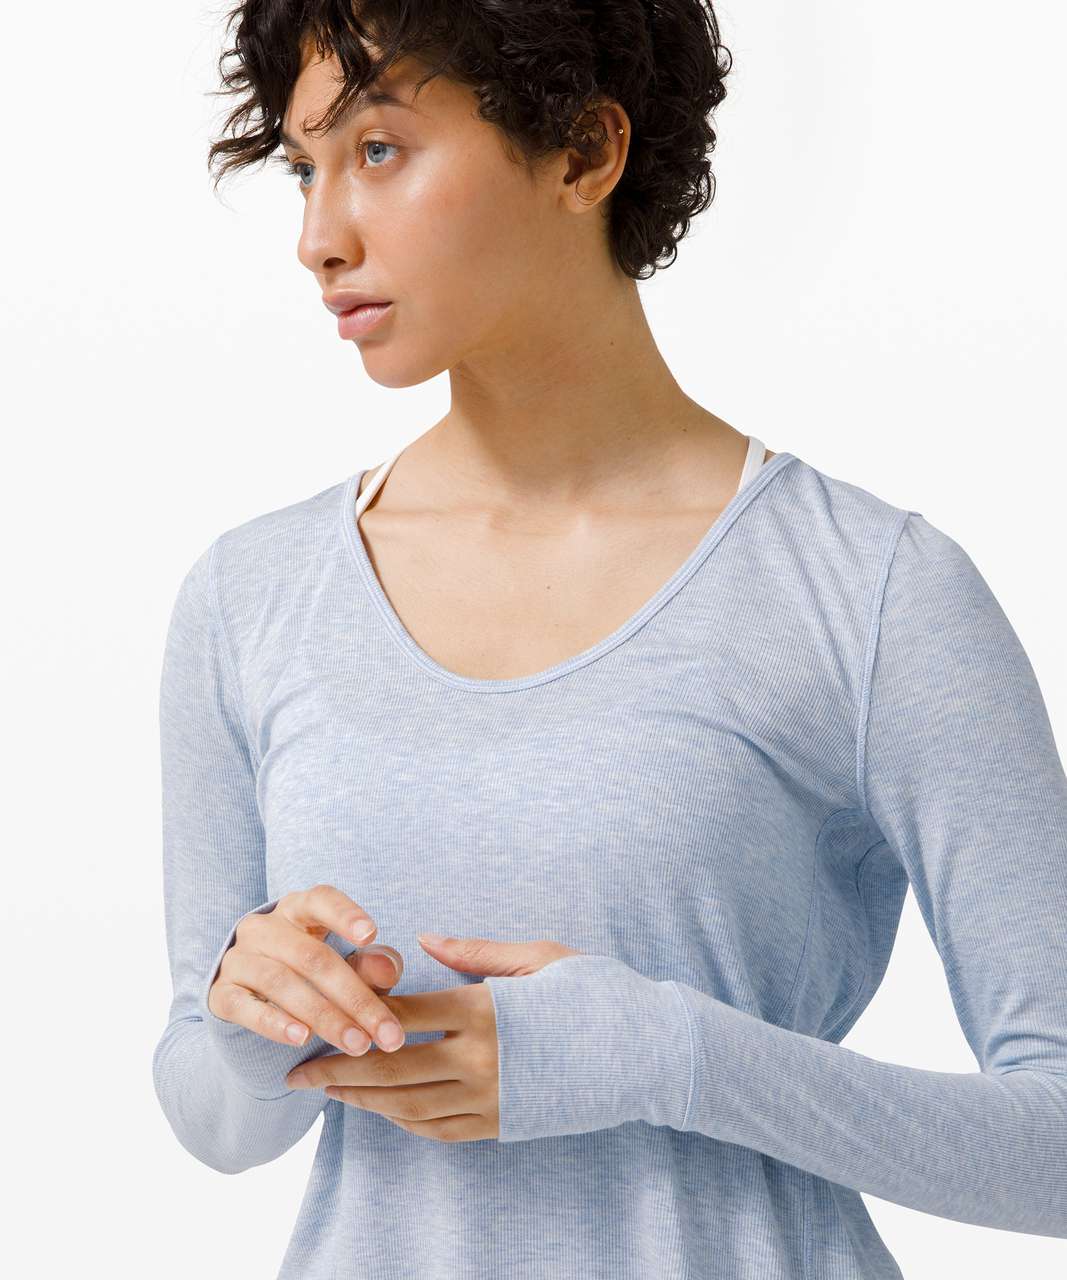 Lululemon Loved and Lifted Long Sleeve - Heathered Daydream